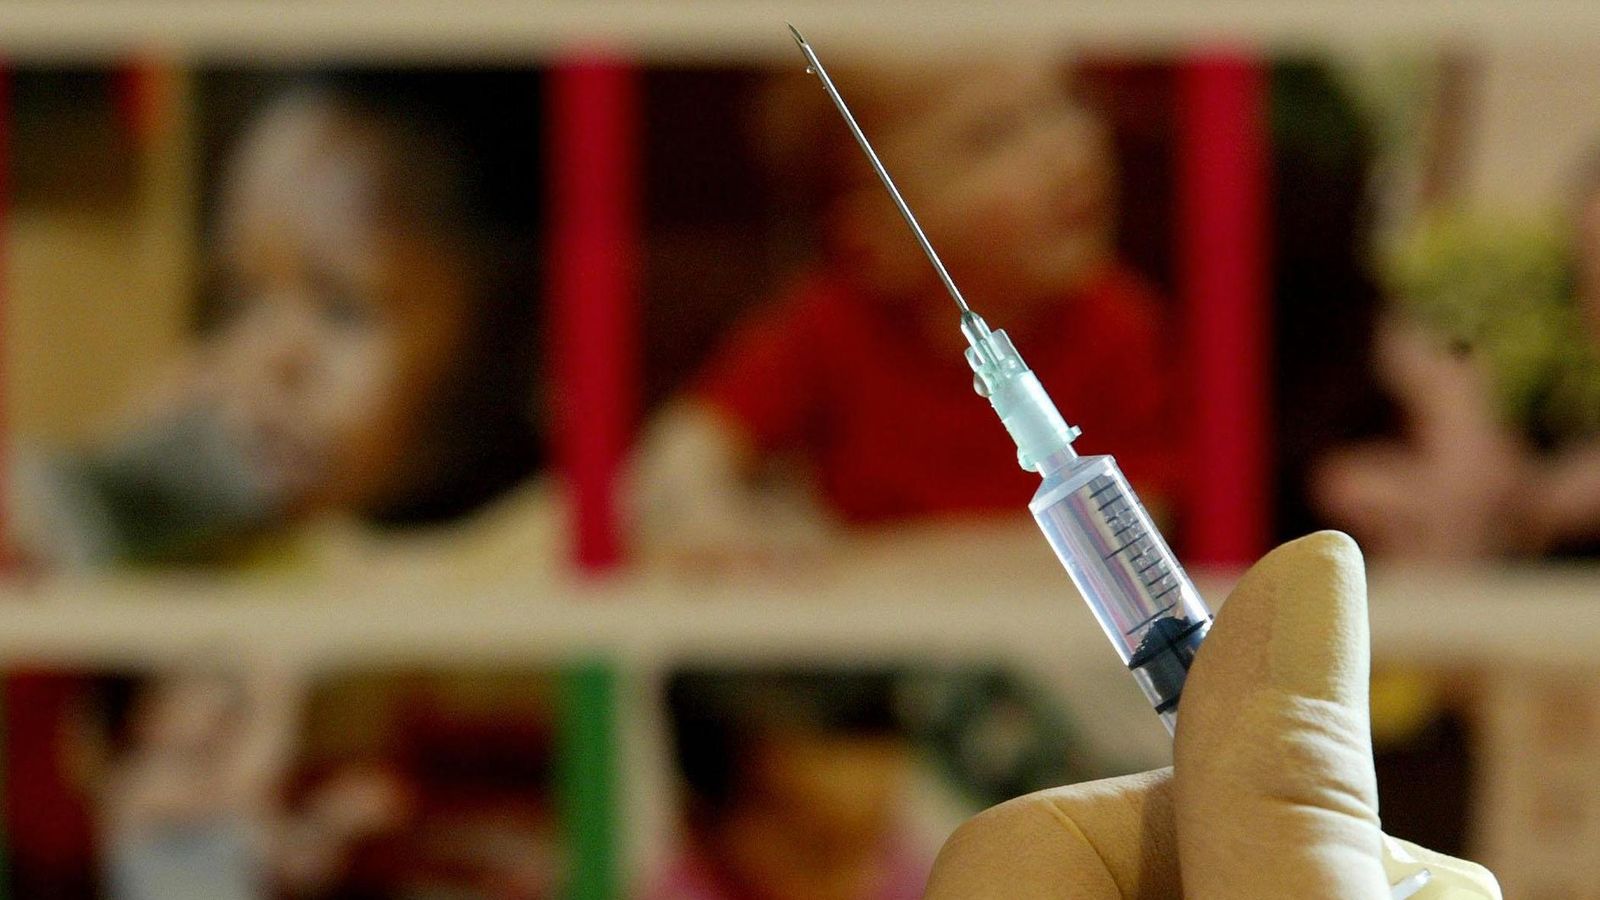 Spike in measles cases sees launch of child vaccine campaign to boost uptake